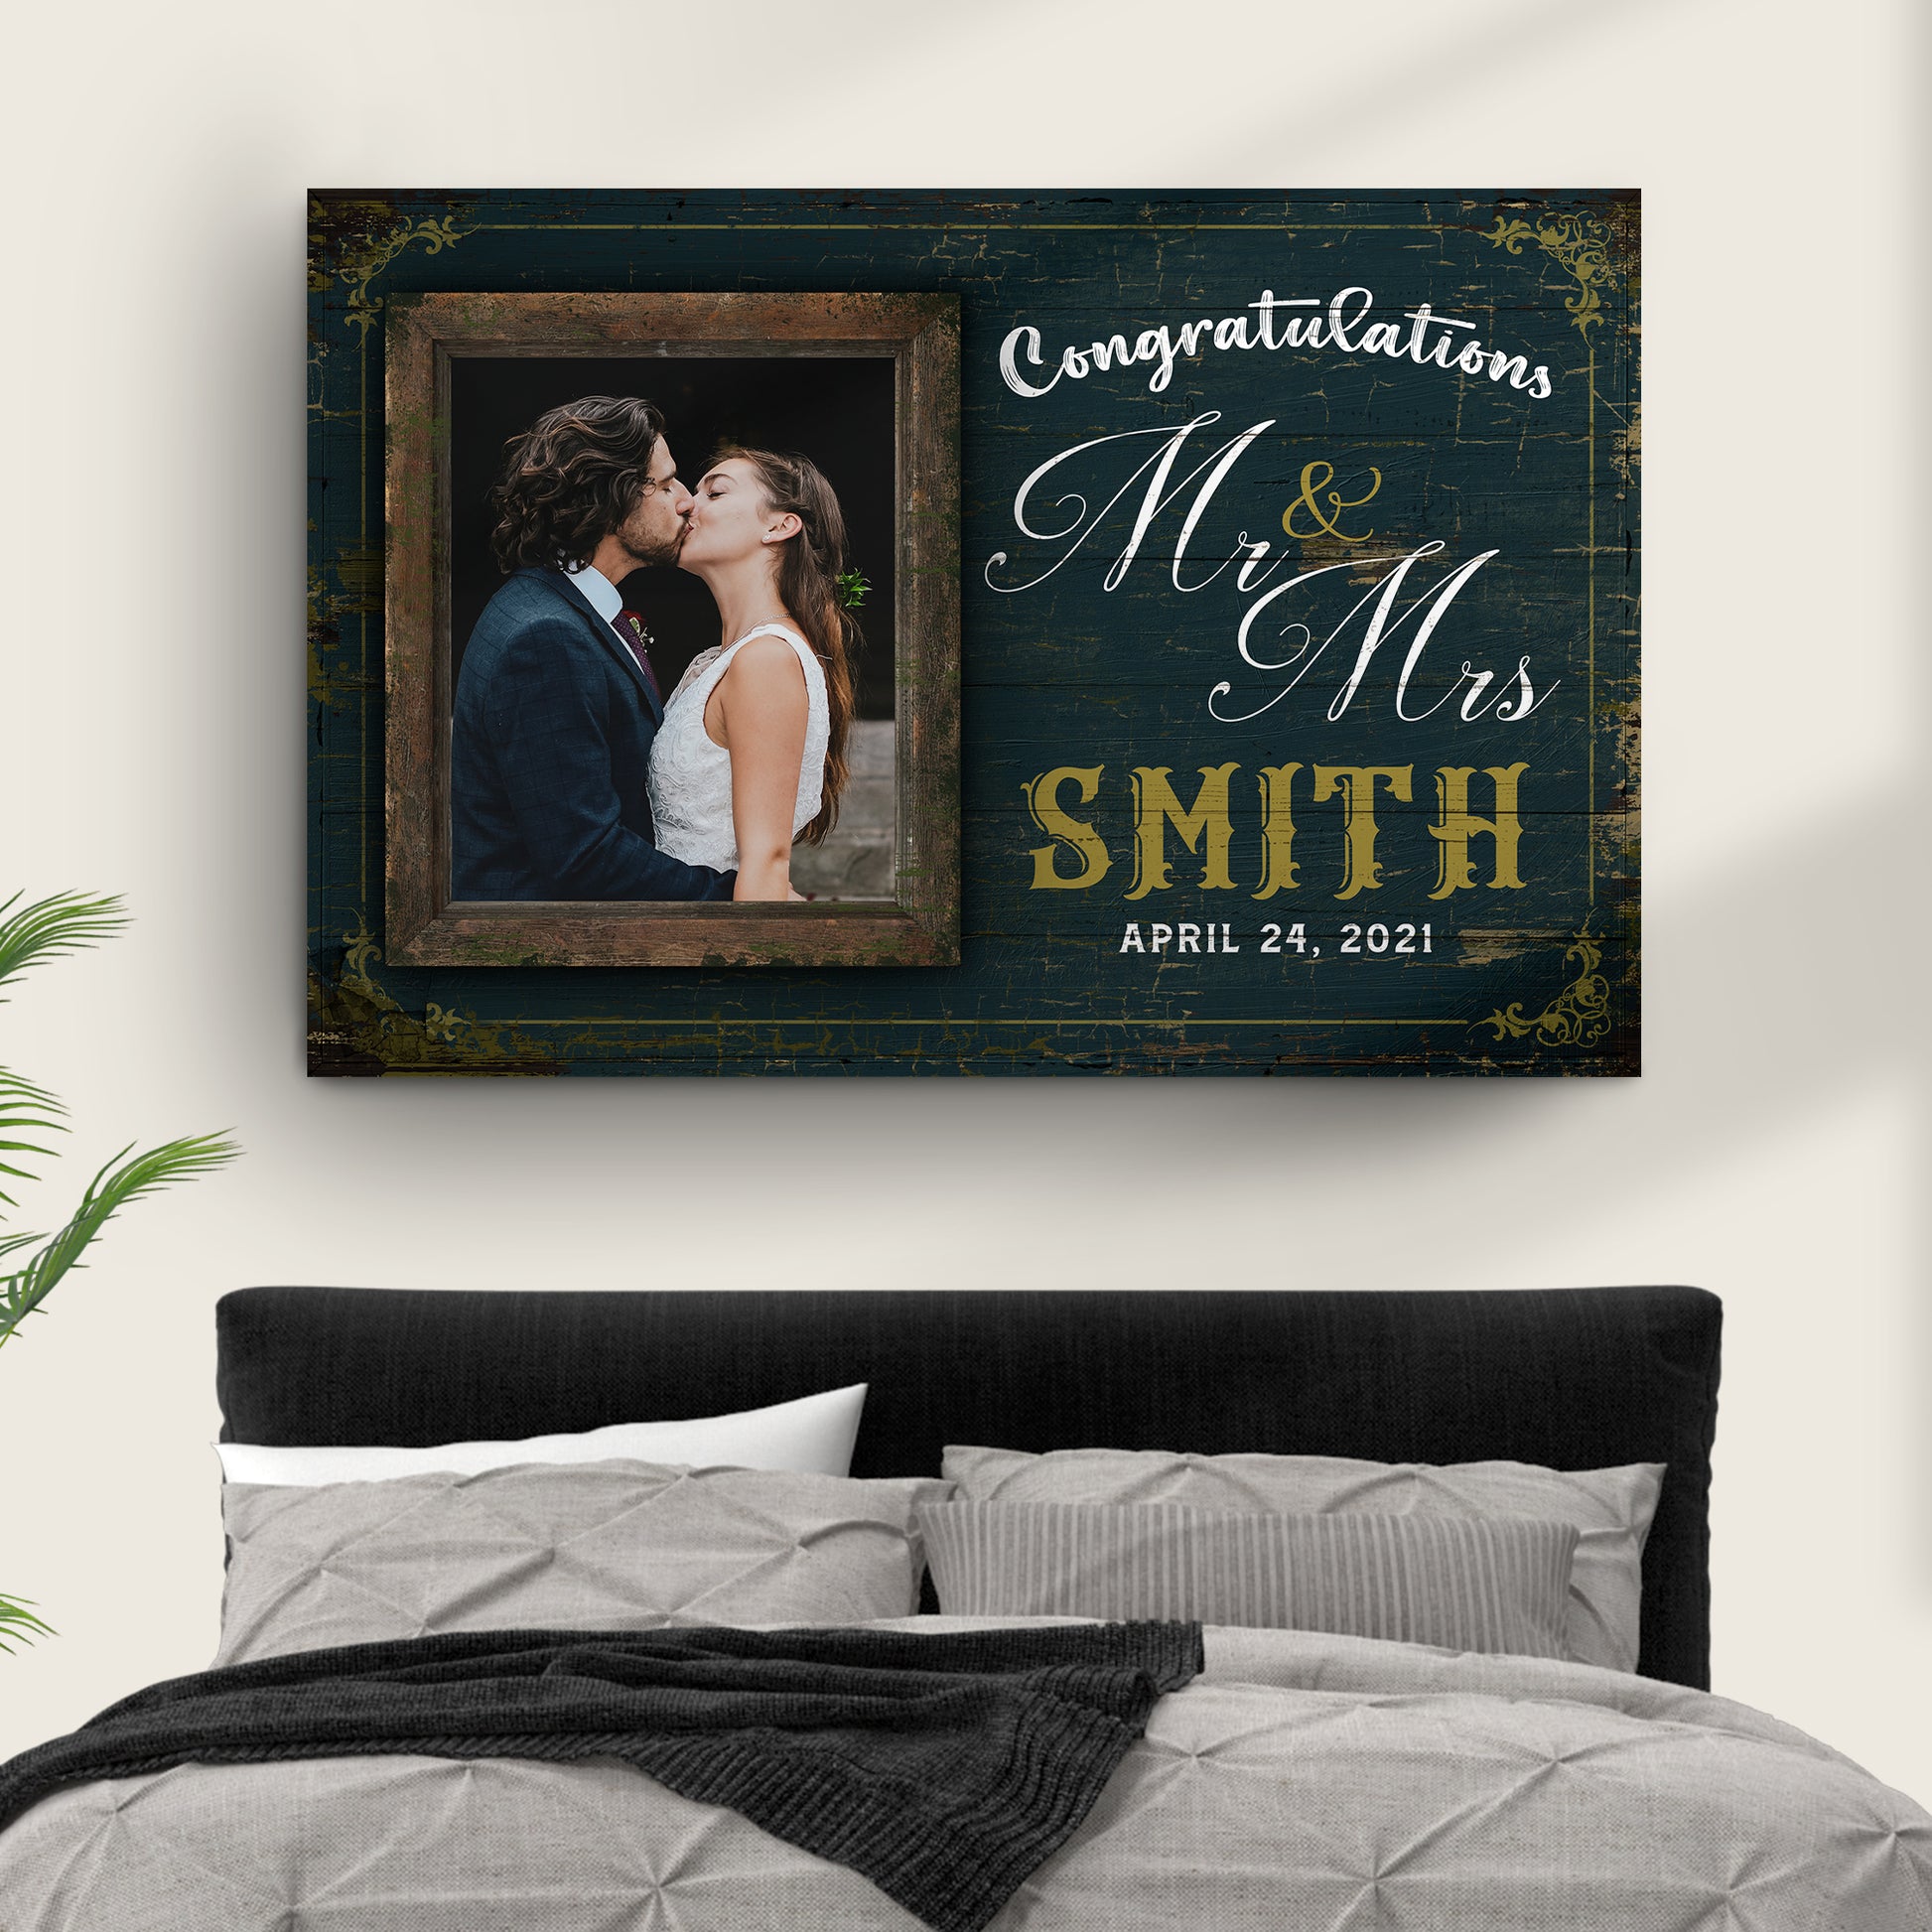 Congratulations Wedding Sign Style 1 - Image by Tailored Canvases